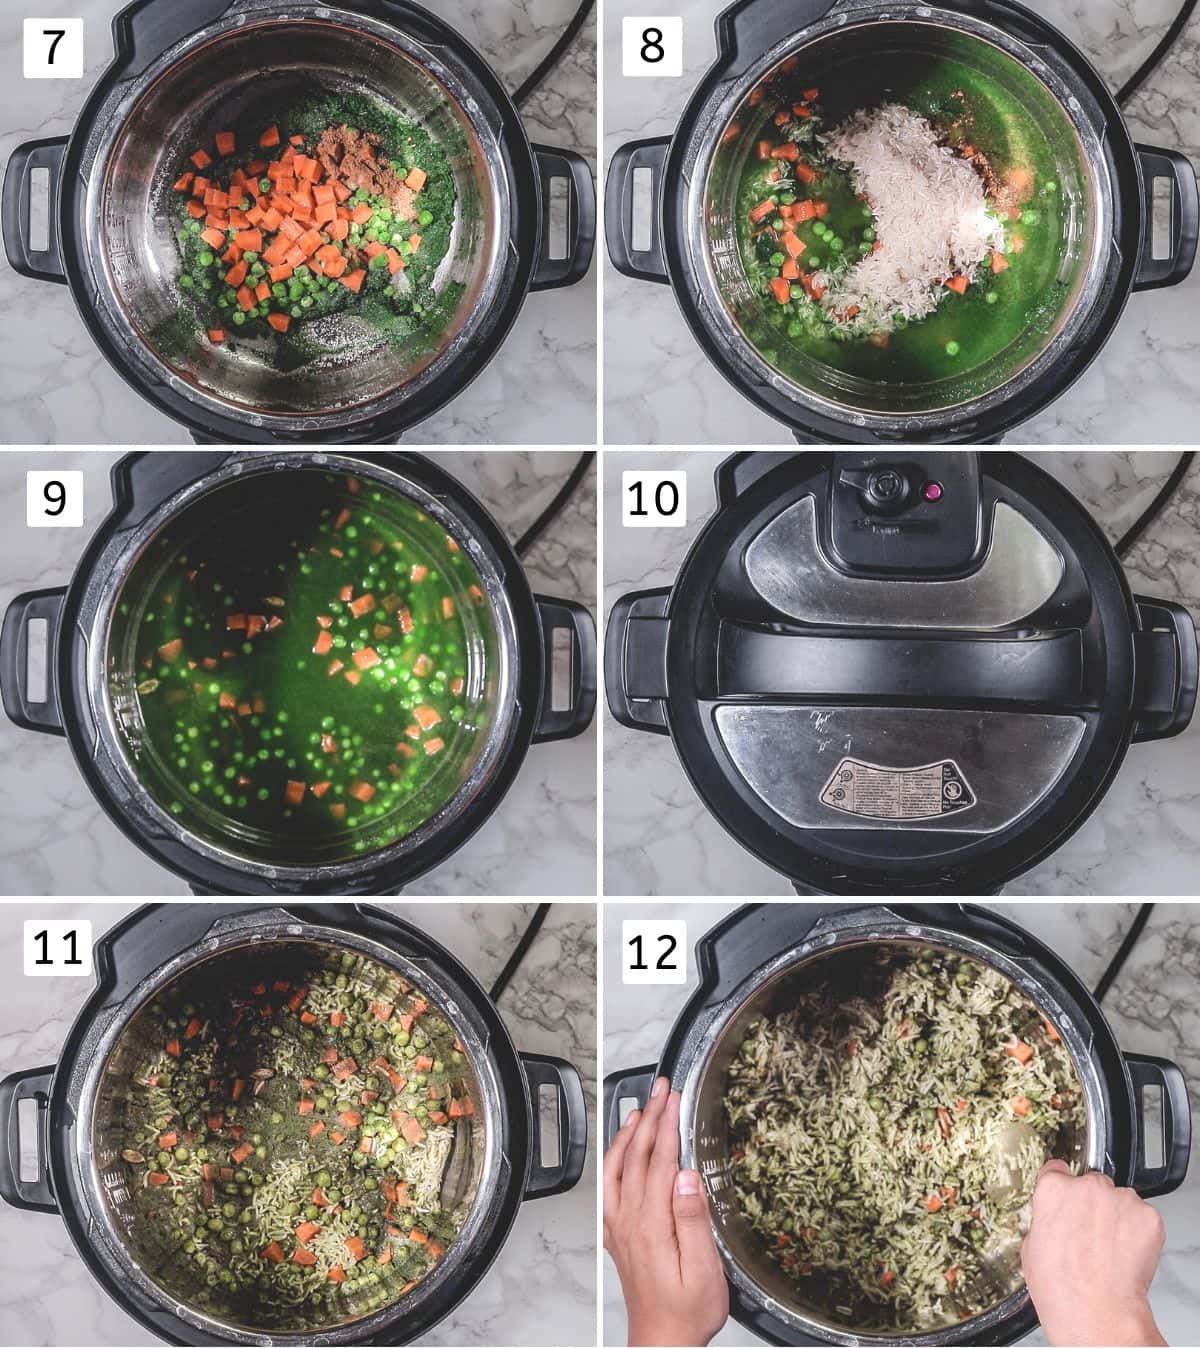 Collage of 6 images showing adding veggies, rice and water, preesure cooking and fluffed up cooked rice.